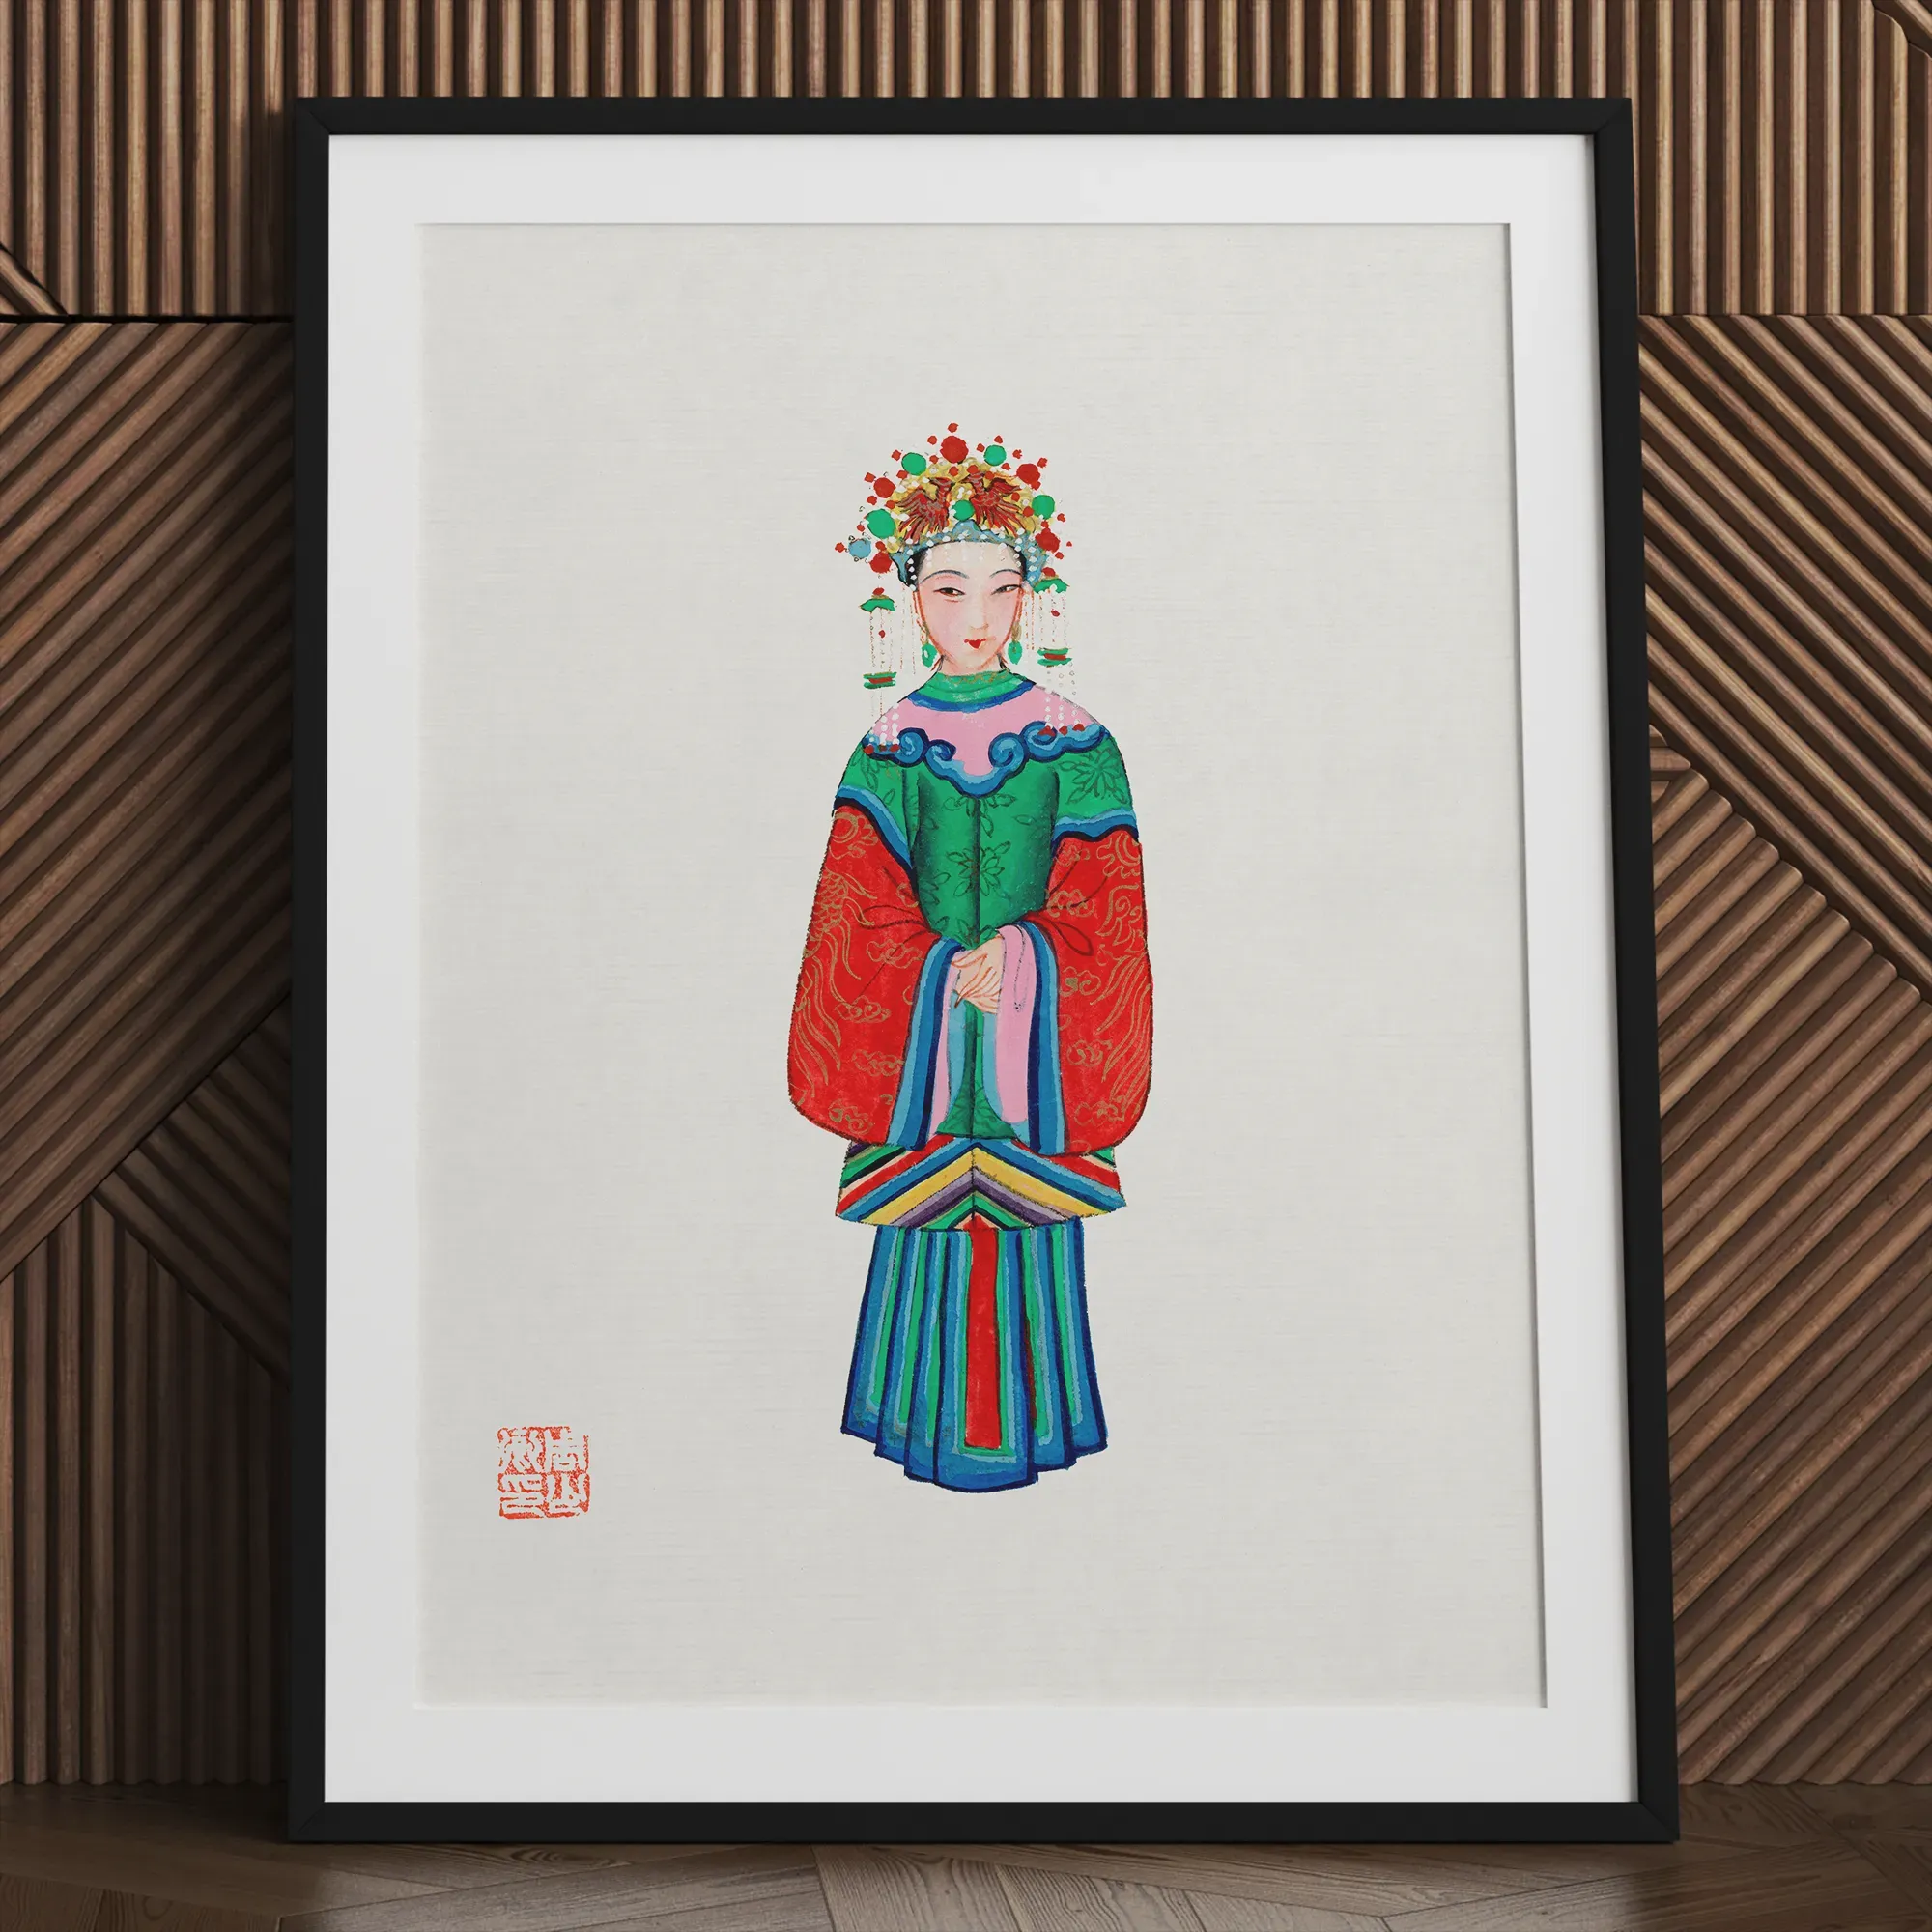 Chinese Imperial Princess Framed & Mounted Print - Posters Prints & Visual Artwork - Aesthetic Art